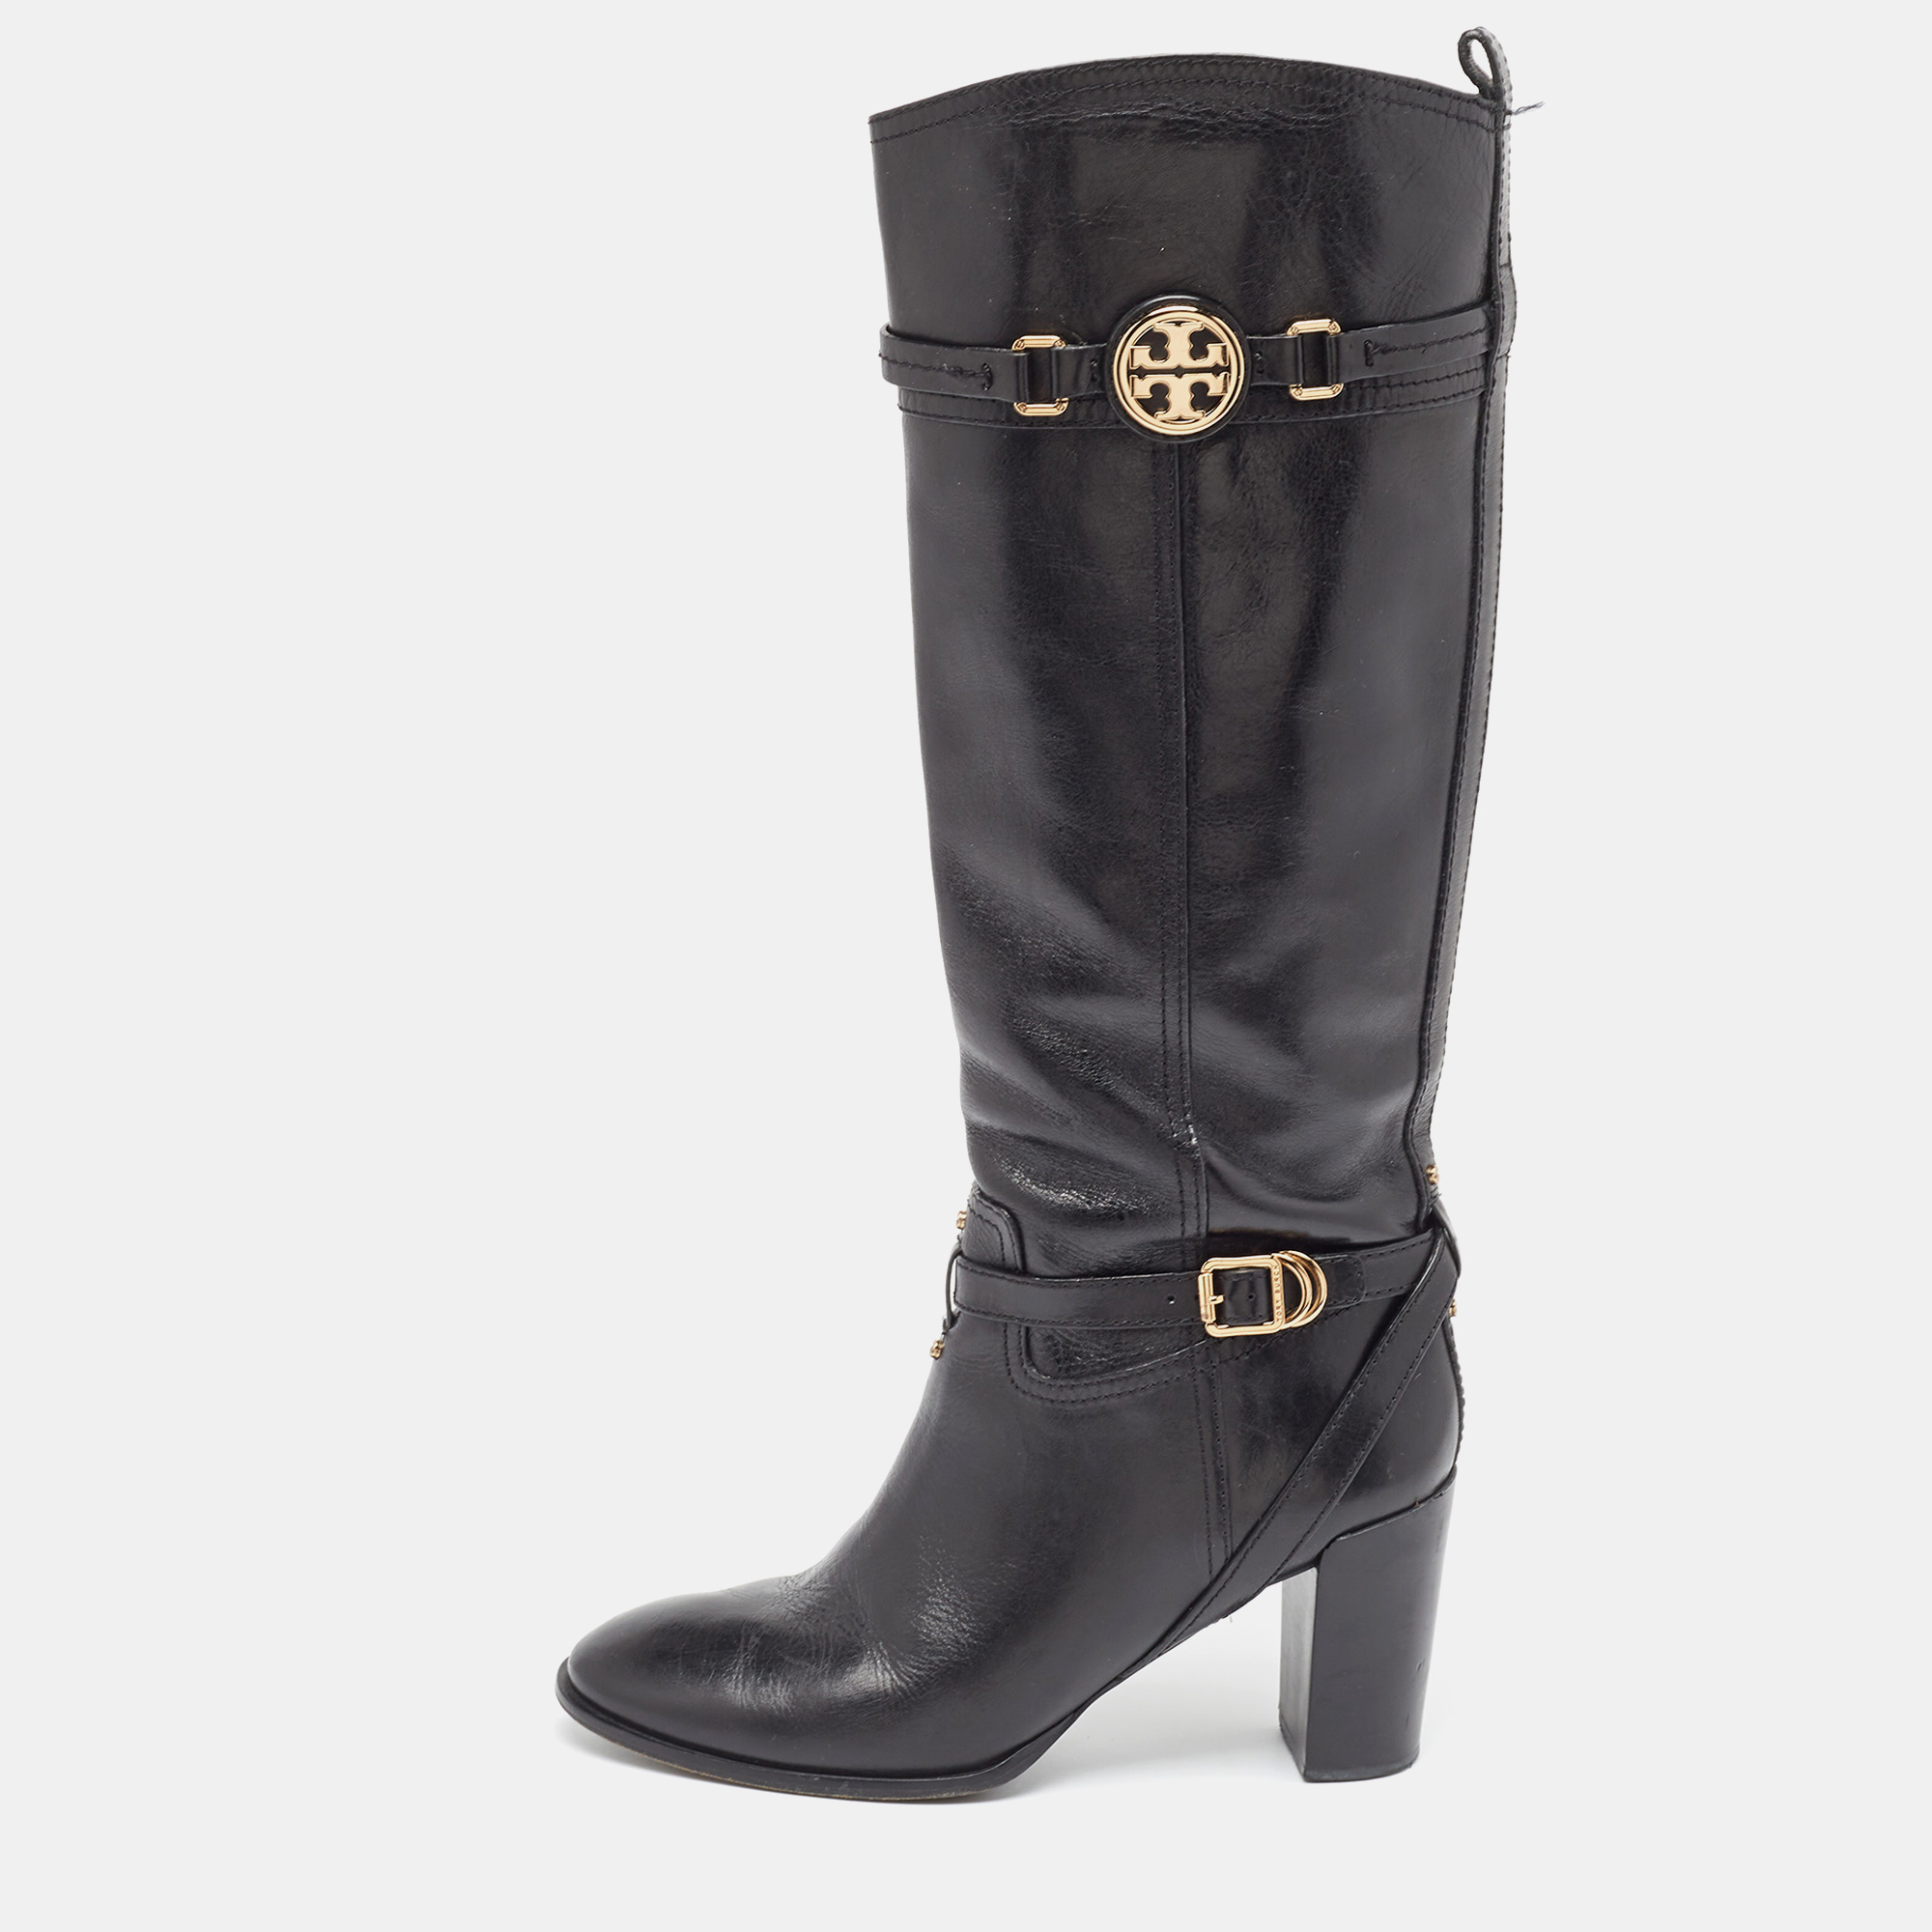 Tory burch black leather knee length boots size 40.5